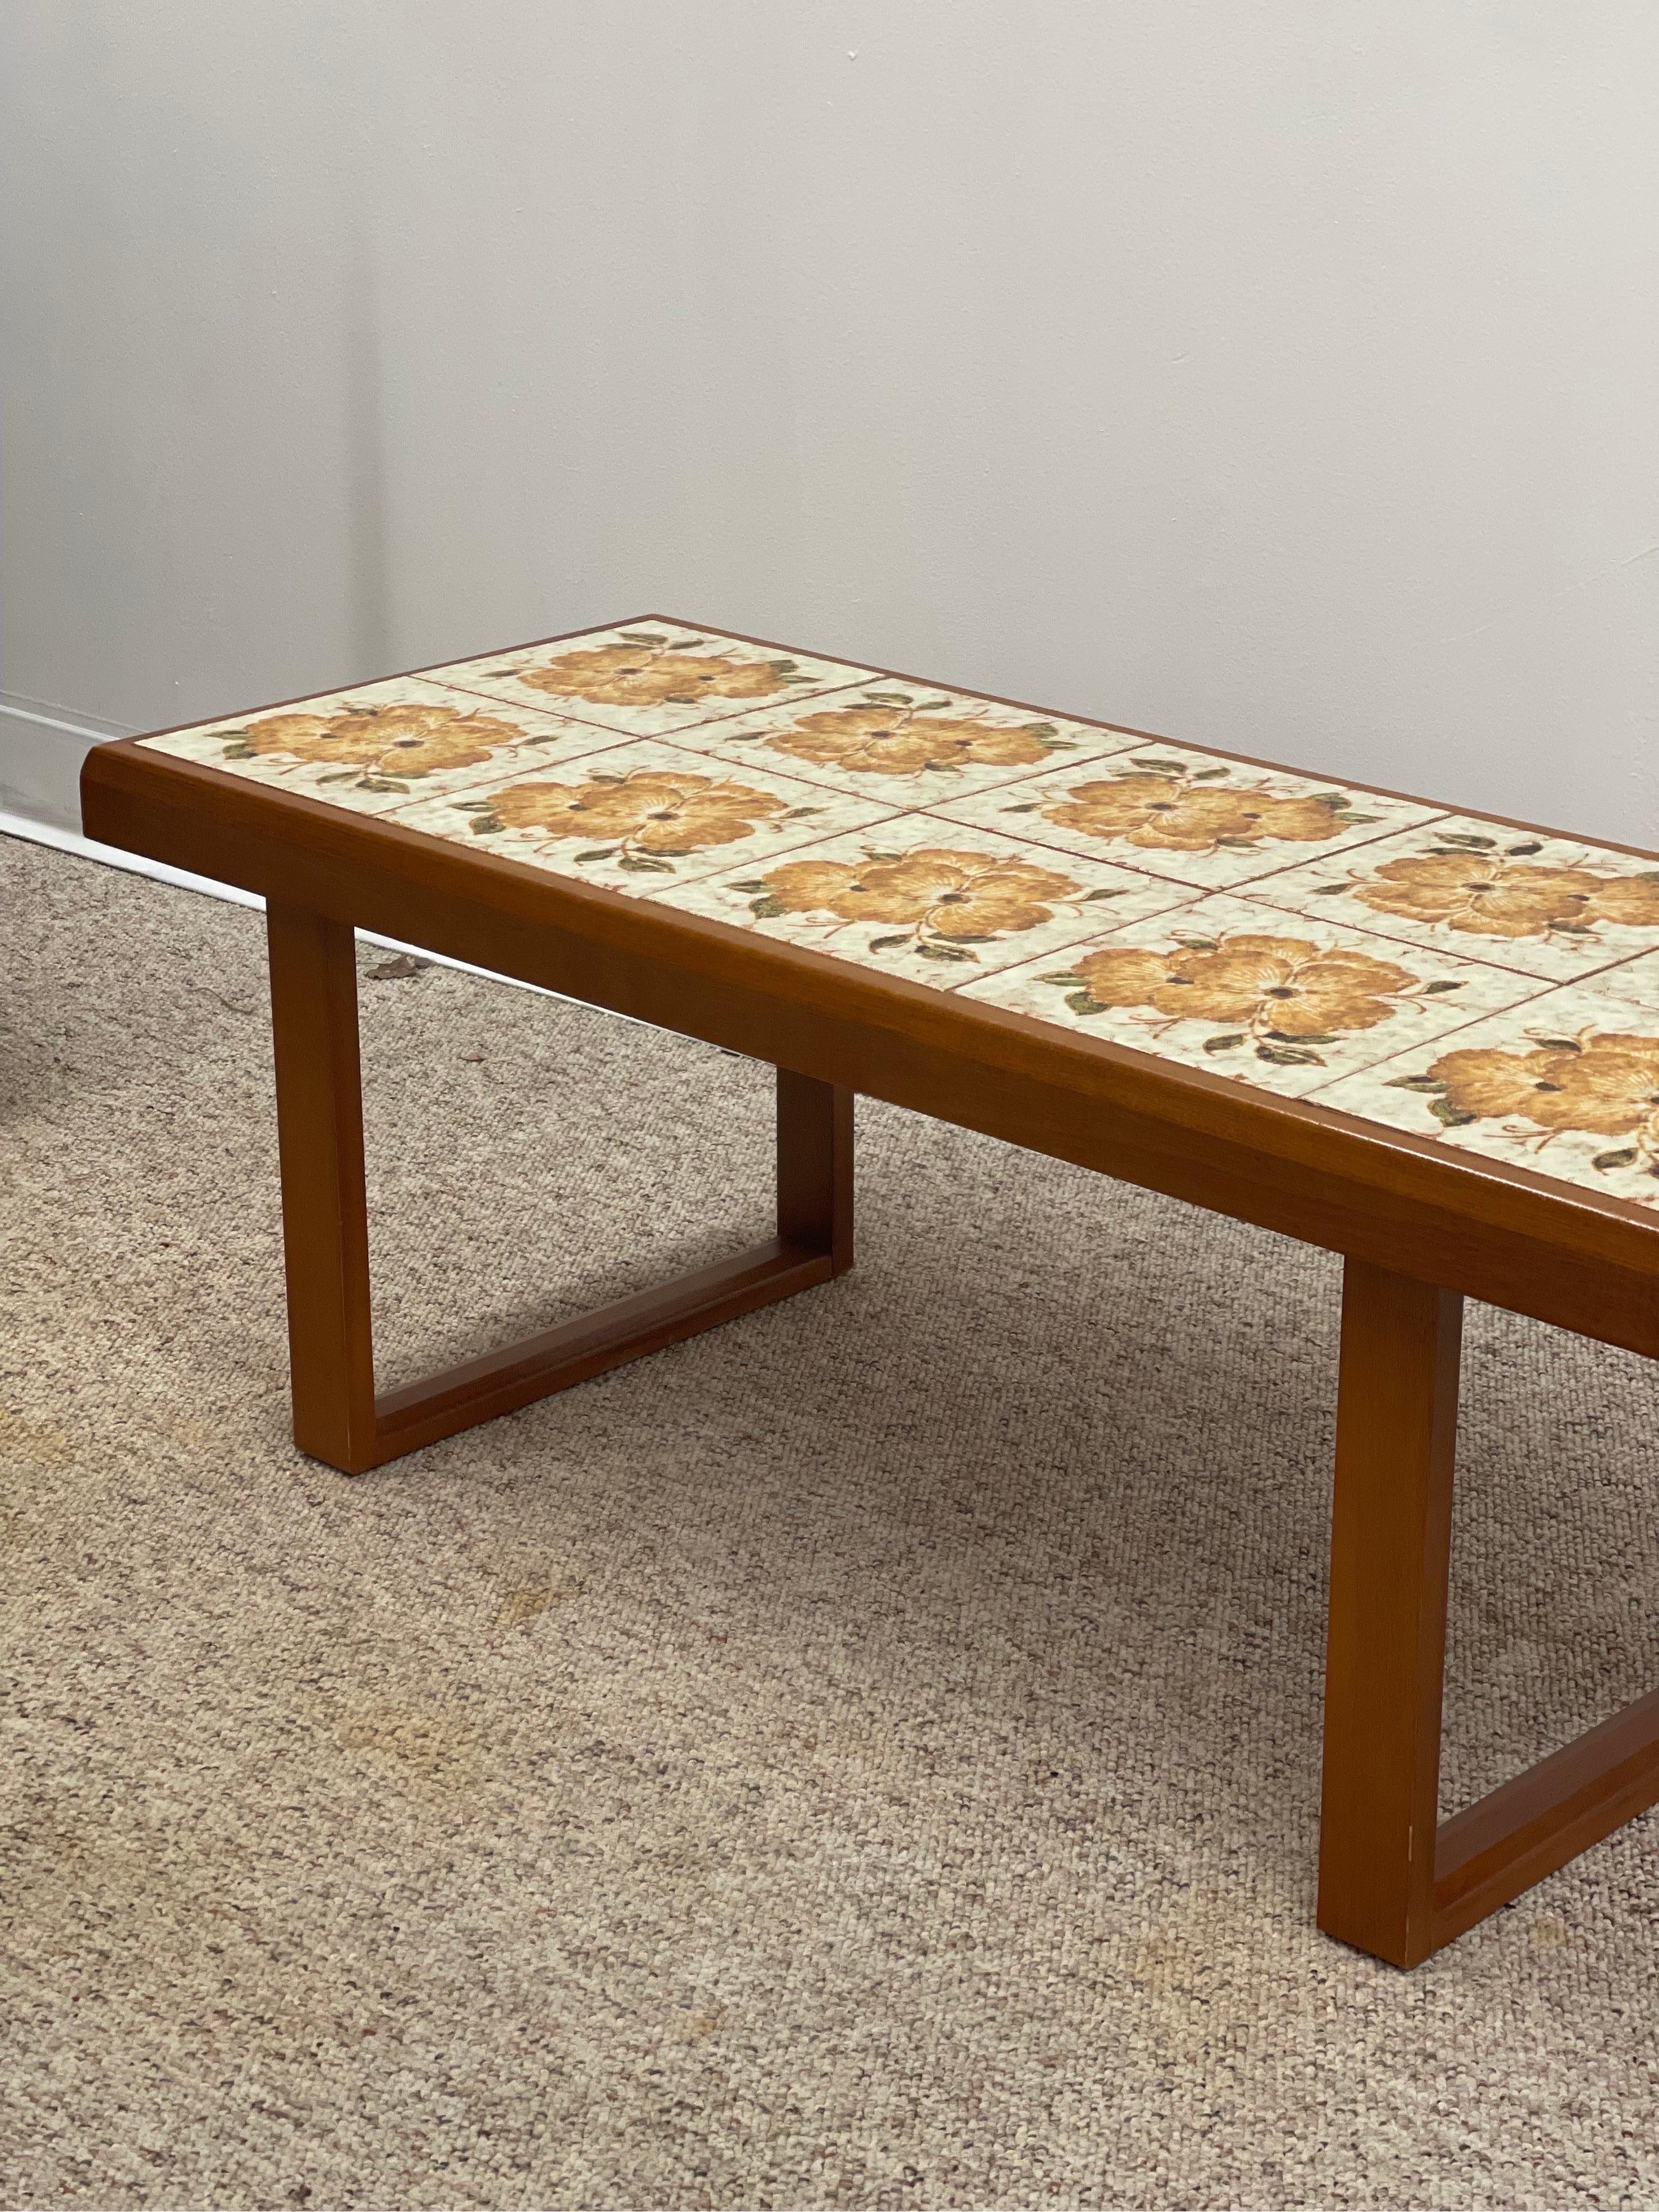 Vintage Mid-Century Modern table. UK Import

Dimensions. 41 1/4 W ; 17 1/2 D ; 15 1/2 H.